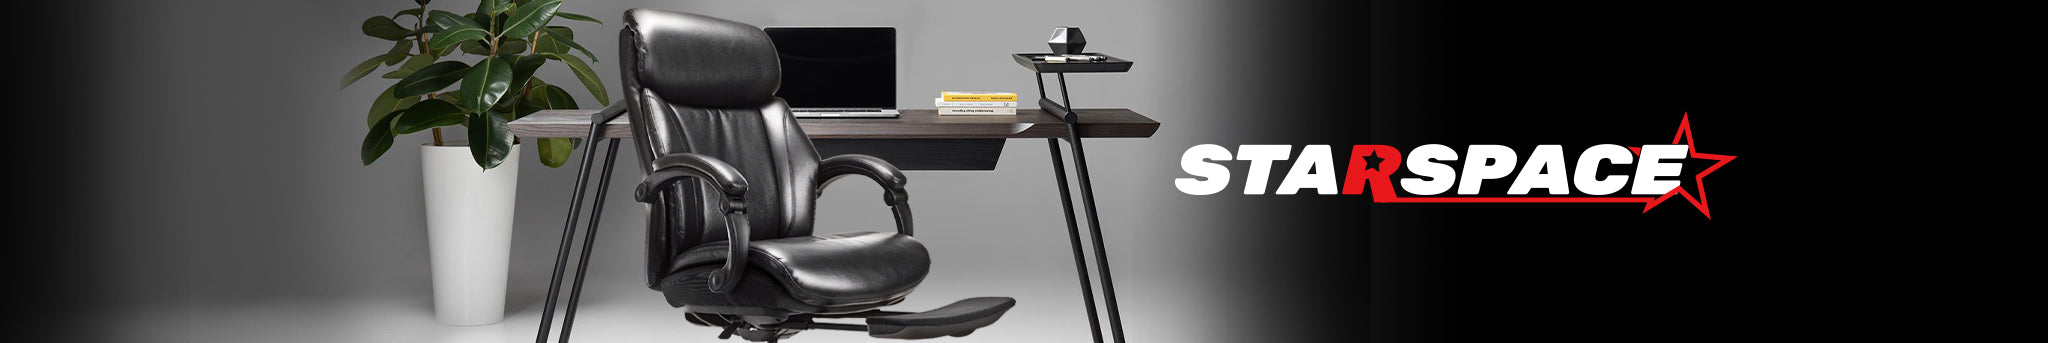 Find Your Perfect Home Office Chair at pfmonline.net - Wide Range of Styles and Comfort Levels Available!